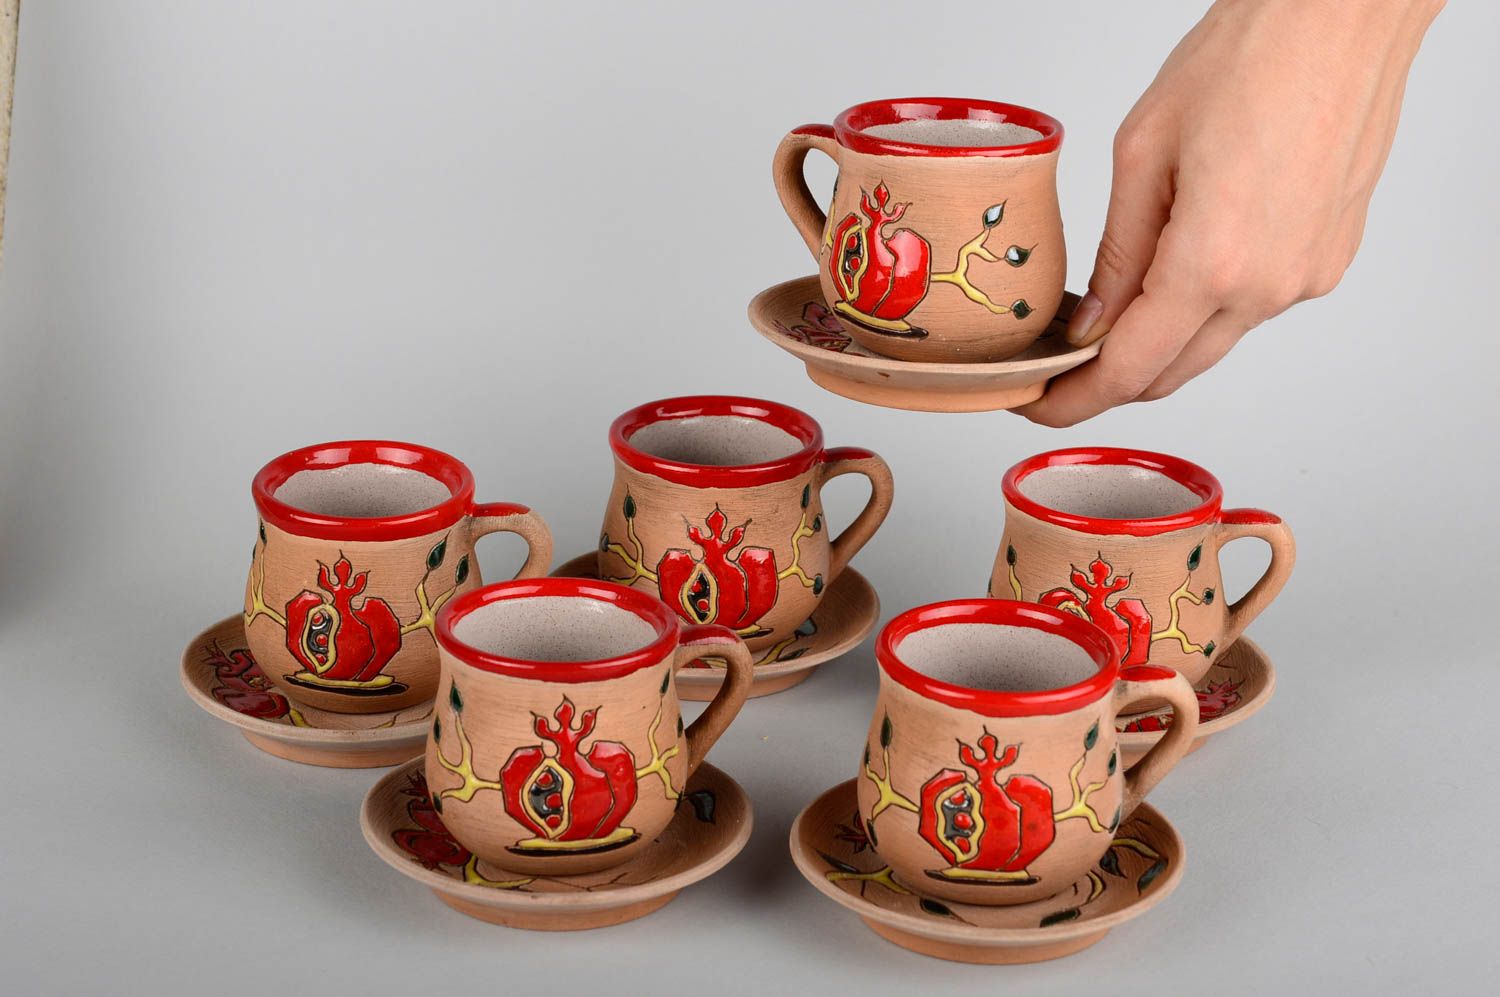 Handmade cup coffee cup set of 6 items clay coffee cup gift ideas clay dishes photo 5